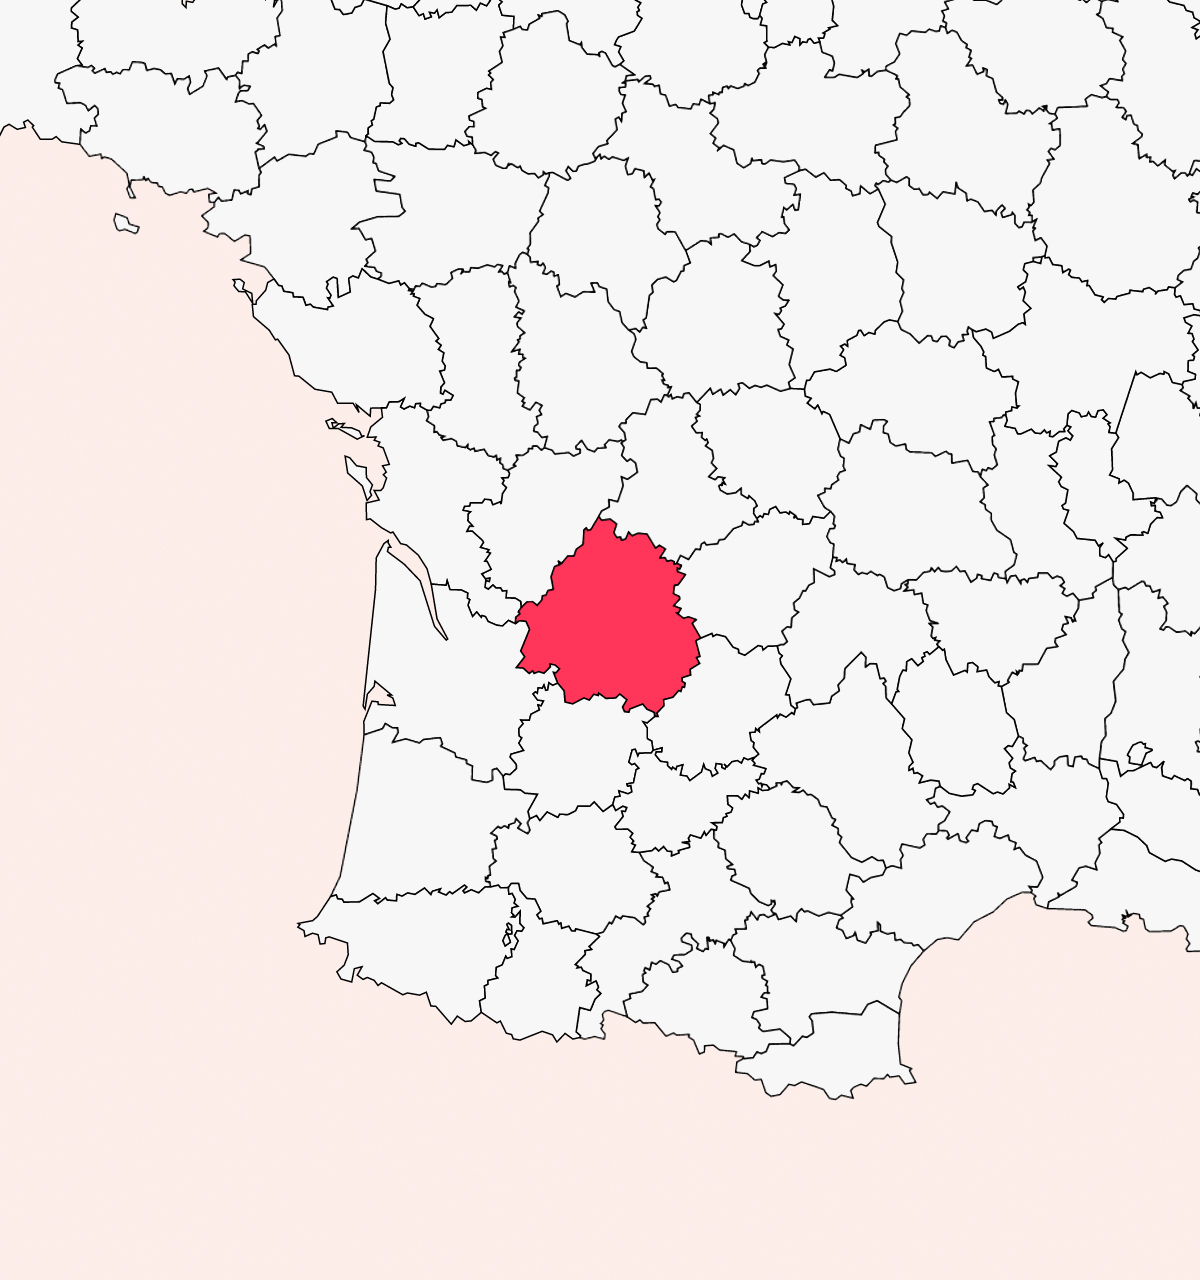 map of the dordogne region in france